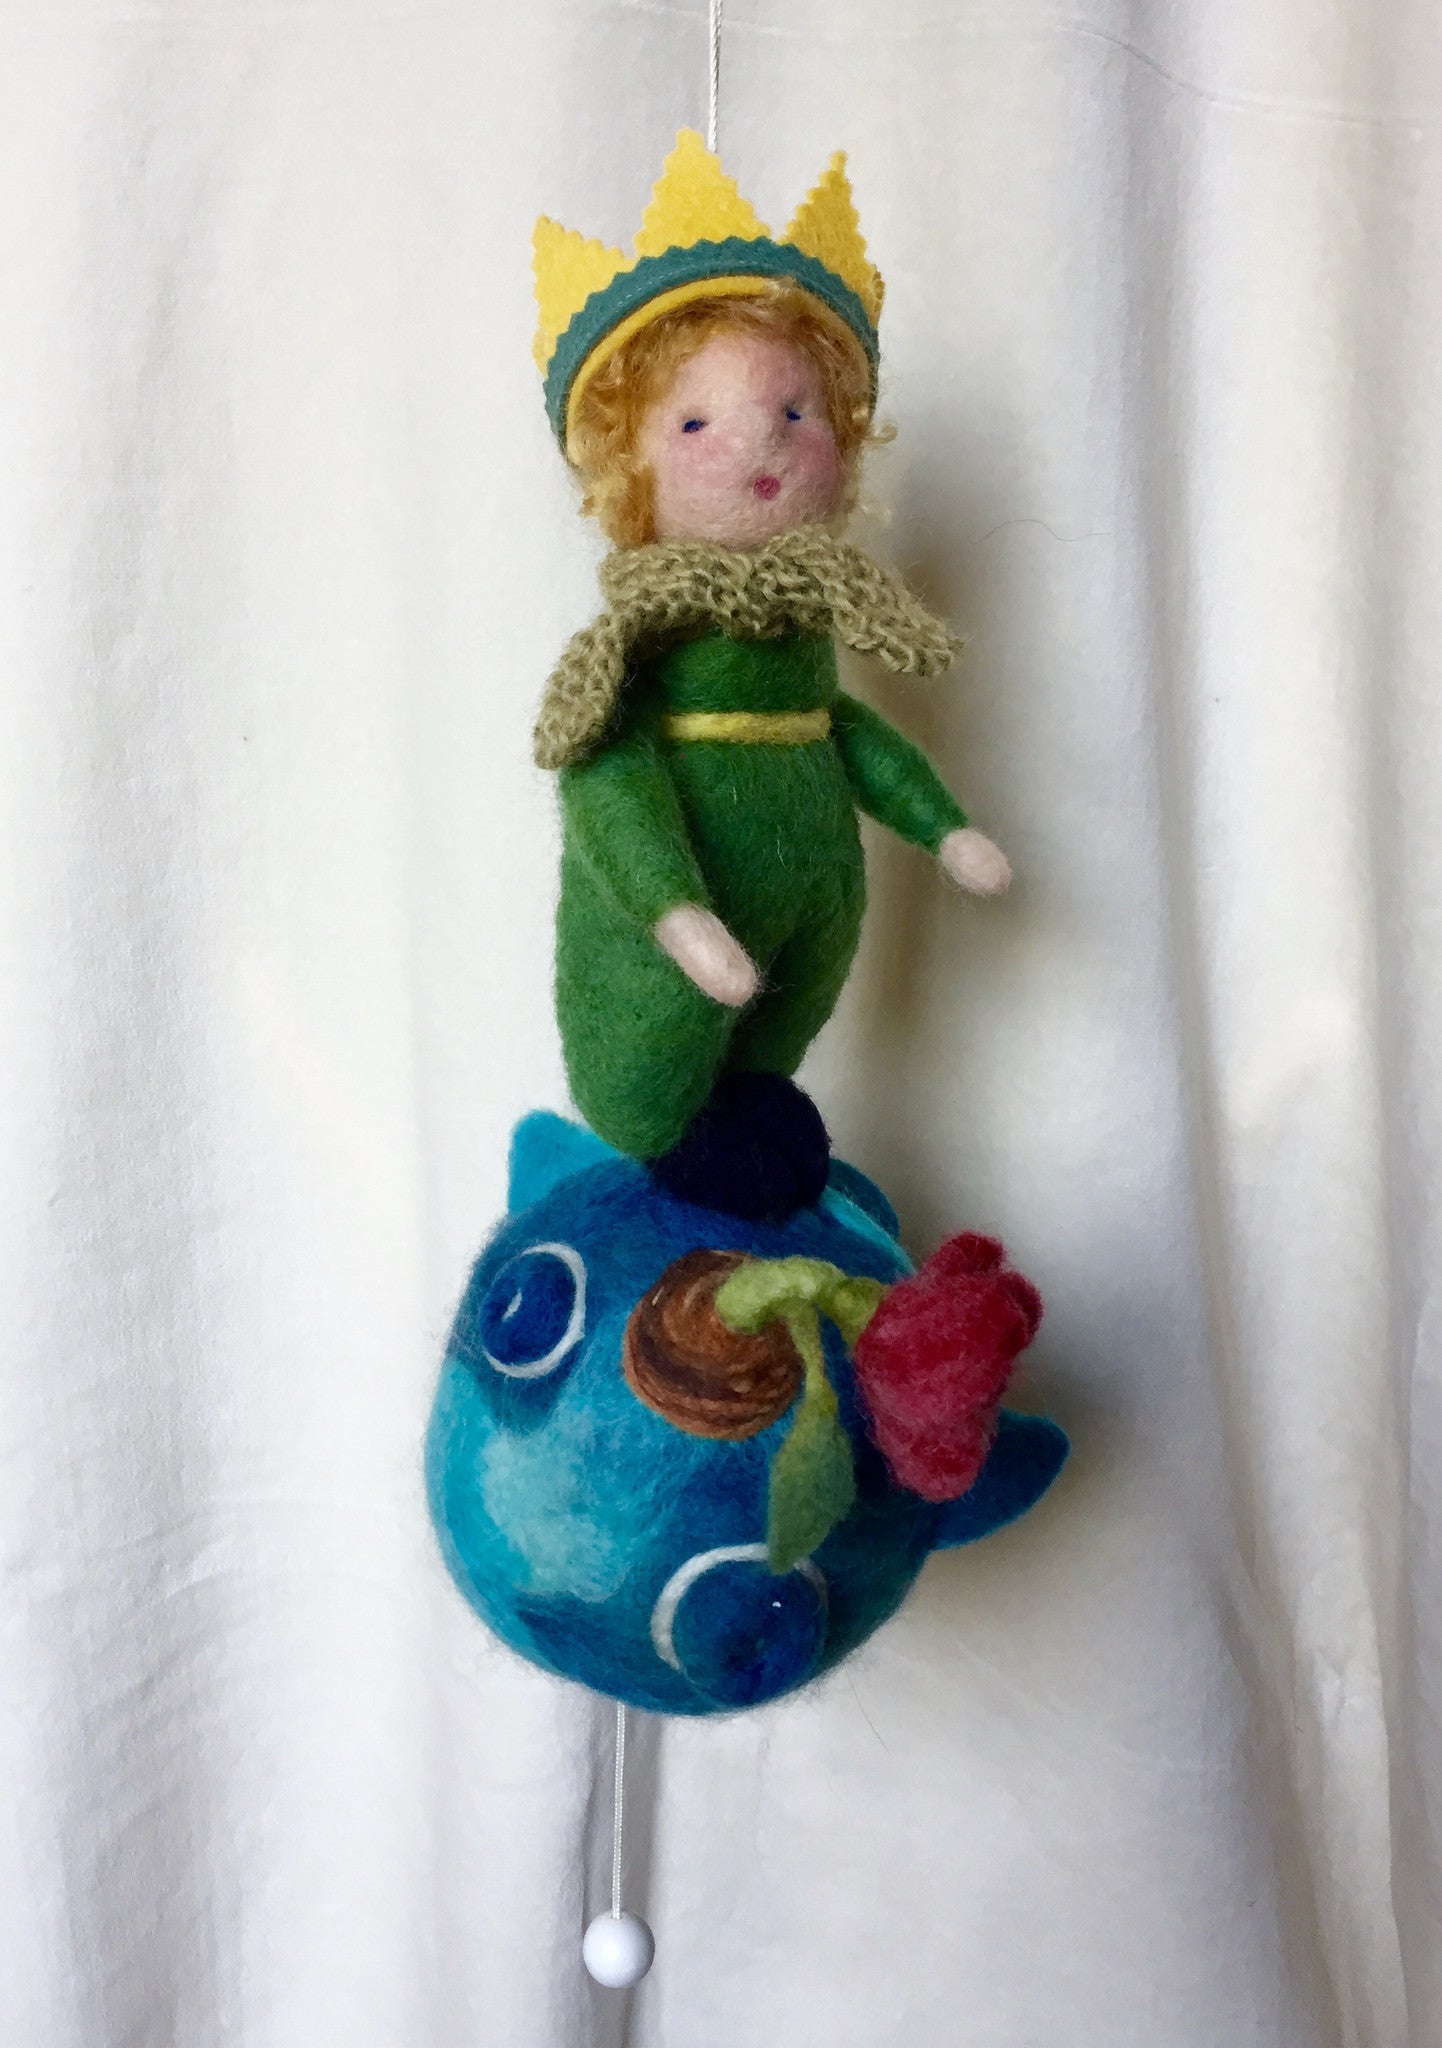 Custom "A little Prince" (not intended for play)